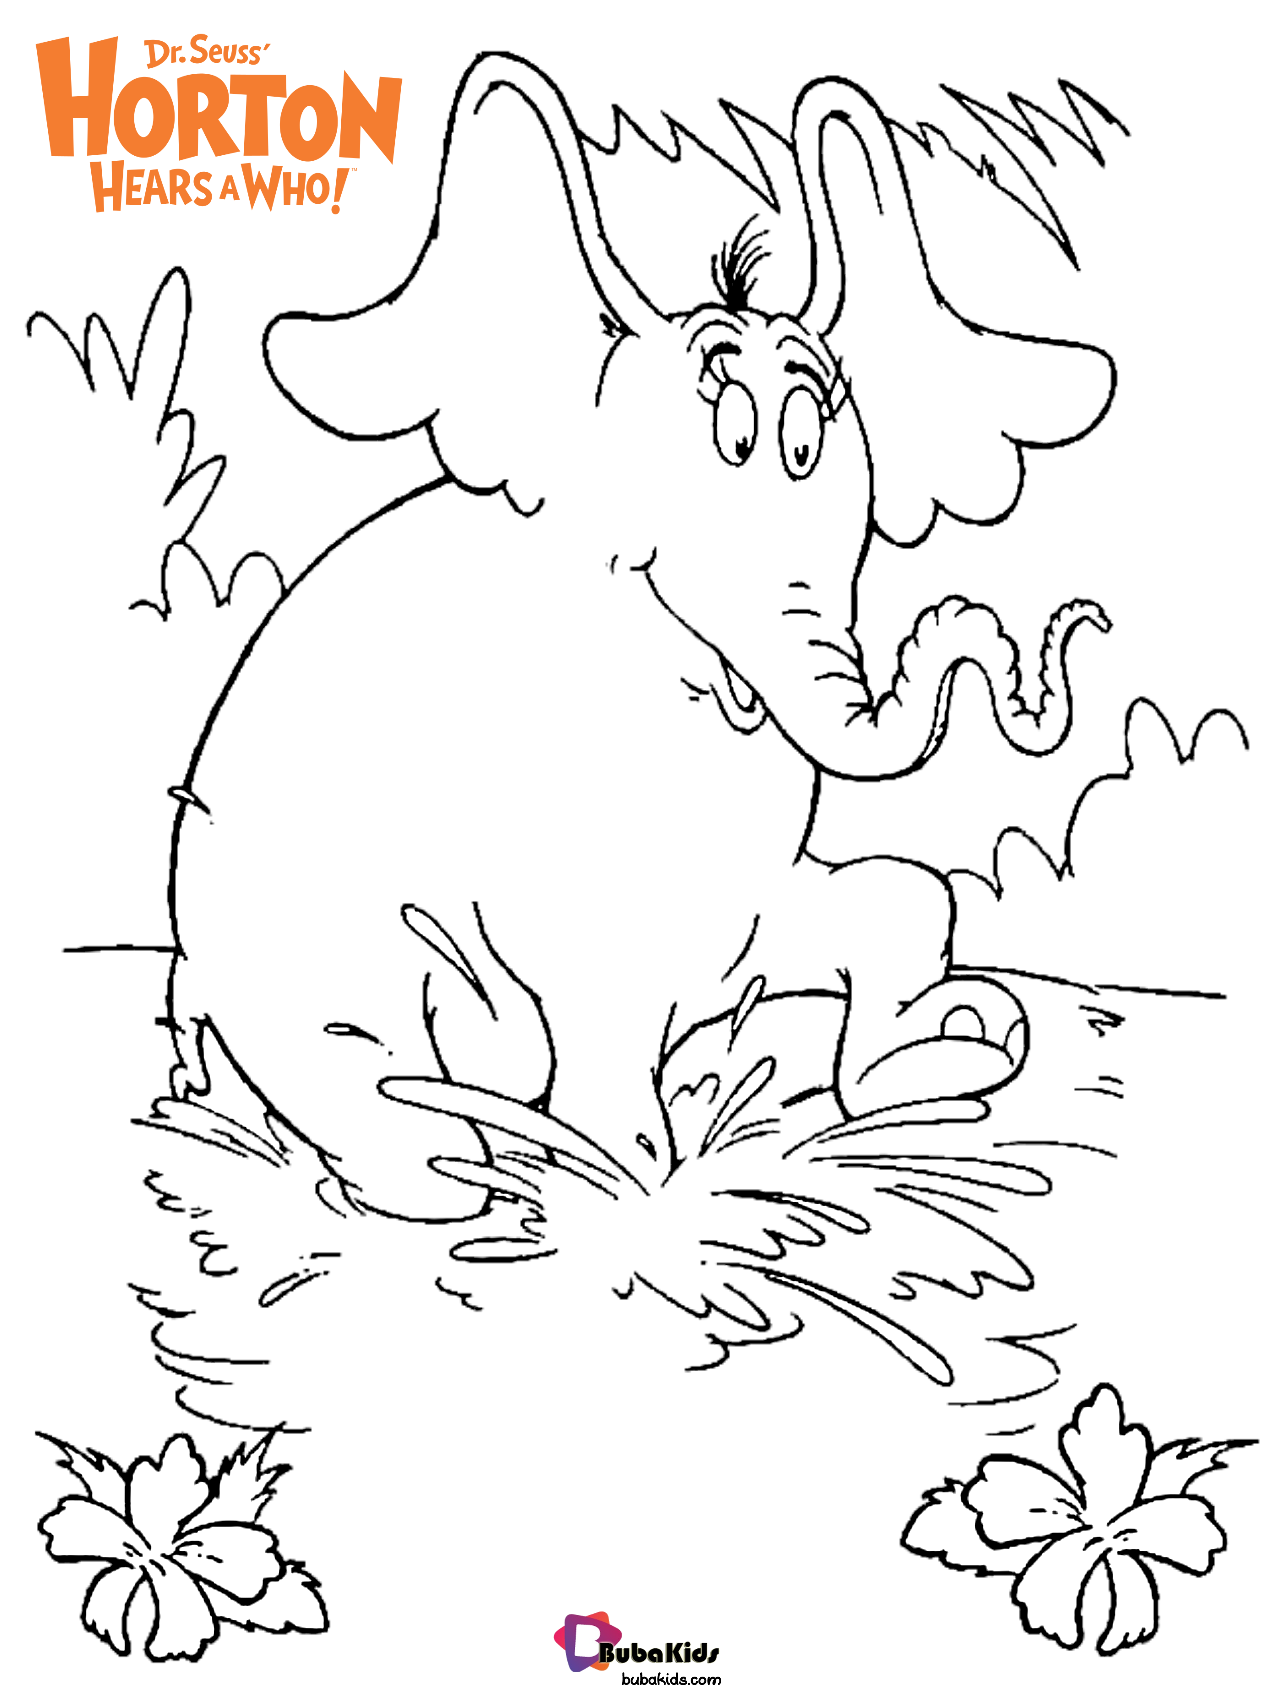 Horton hears a who coloring page dr seuss coloring